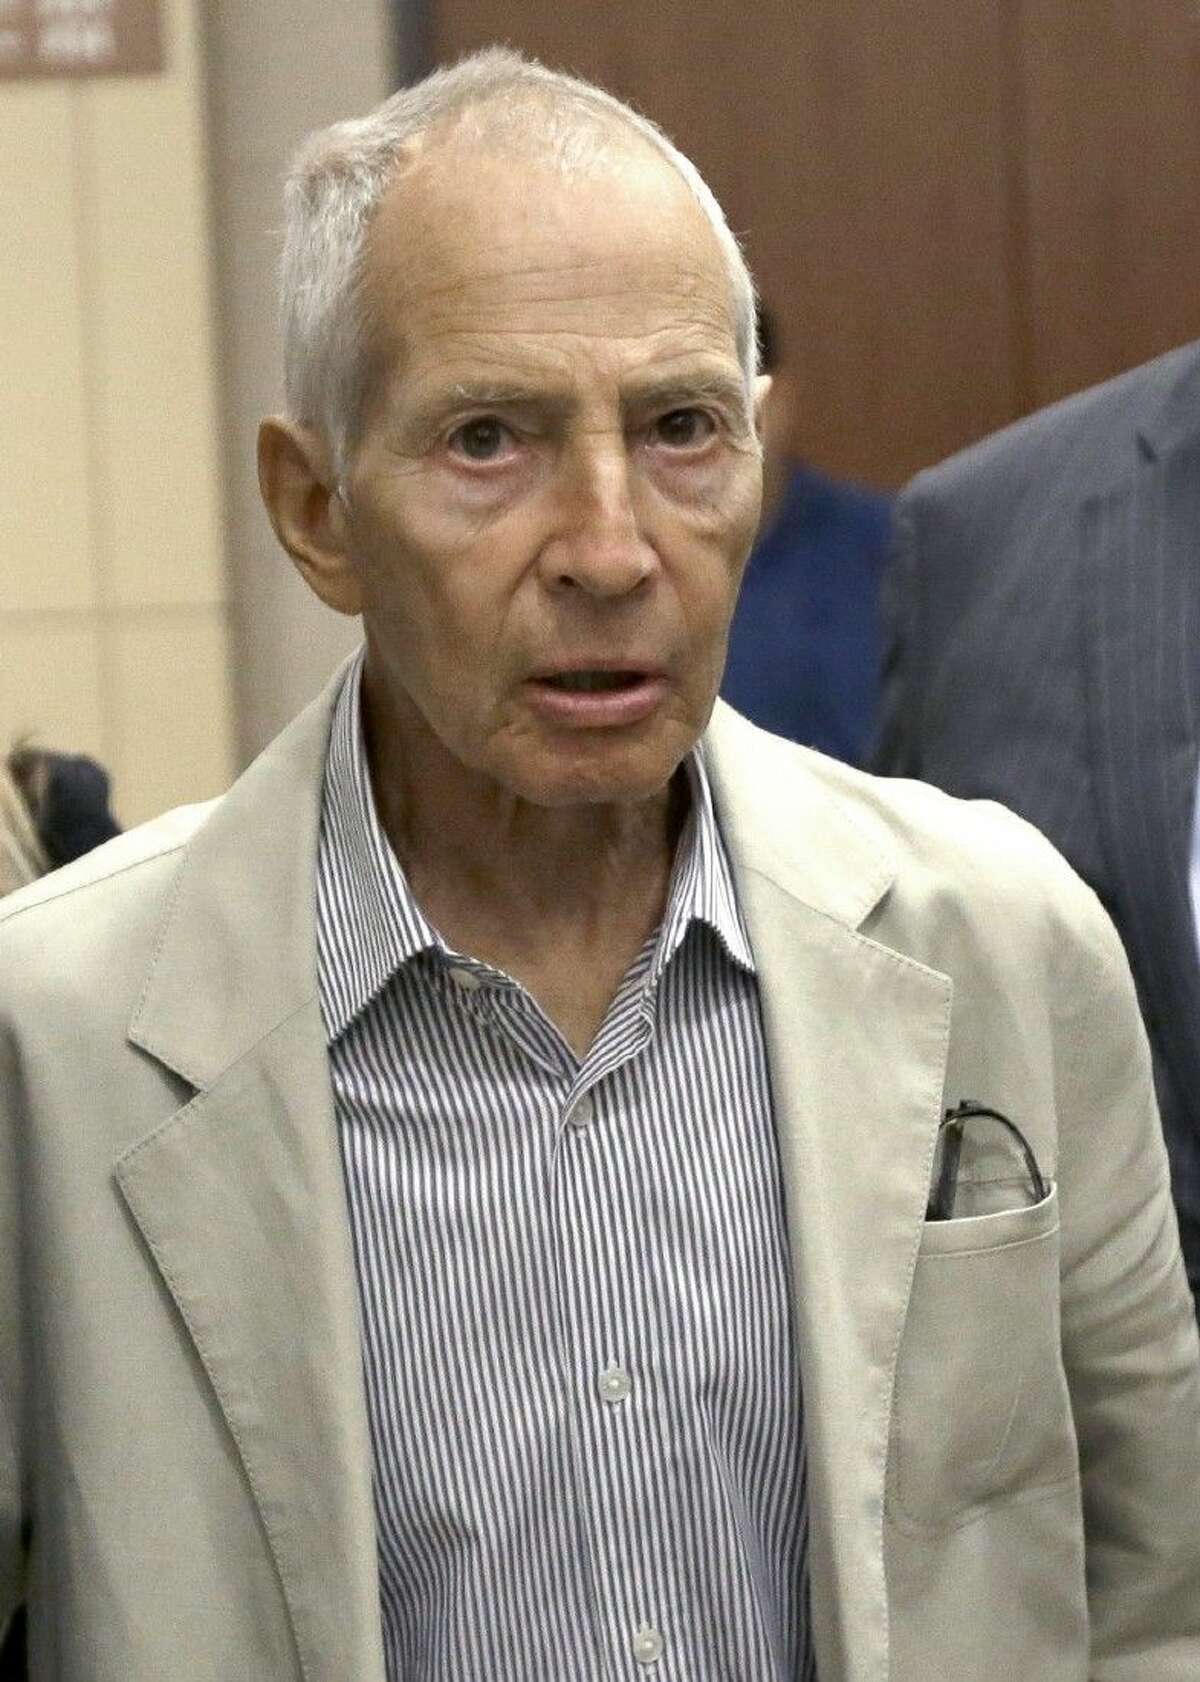 In this Aug. 15, 2014 file photo, New York City real estate heir Robert Durst leaves a Houston courtroom. Durst was arrested on a murder warrant just before Sunday evening’s finale of an HBO serial documentary about his links to three sensational killings. In the finale he said he “killed them all.”